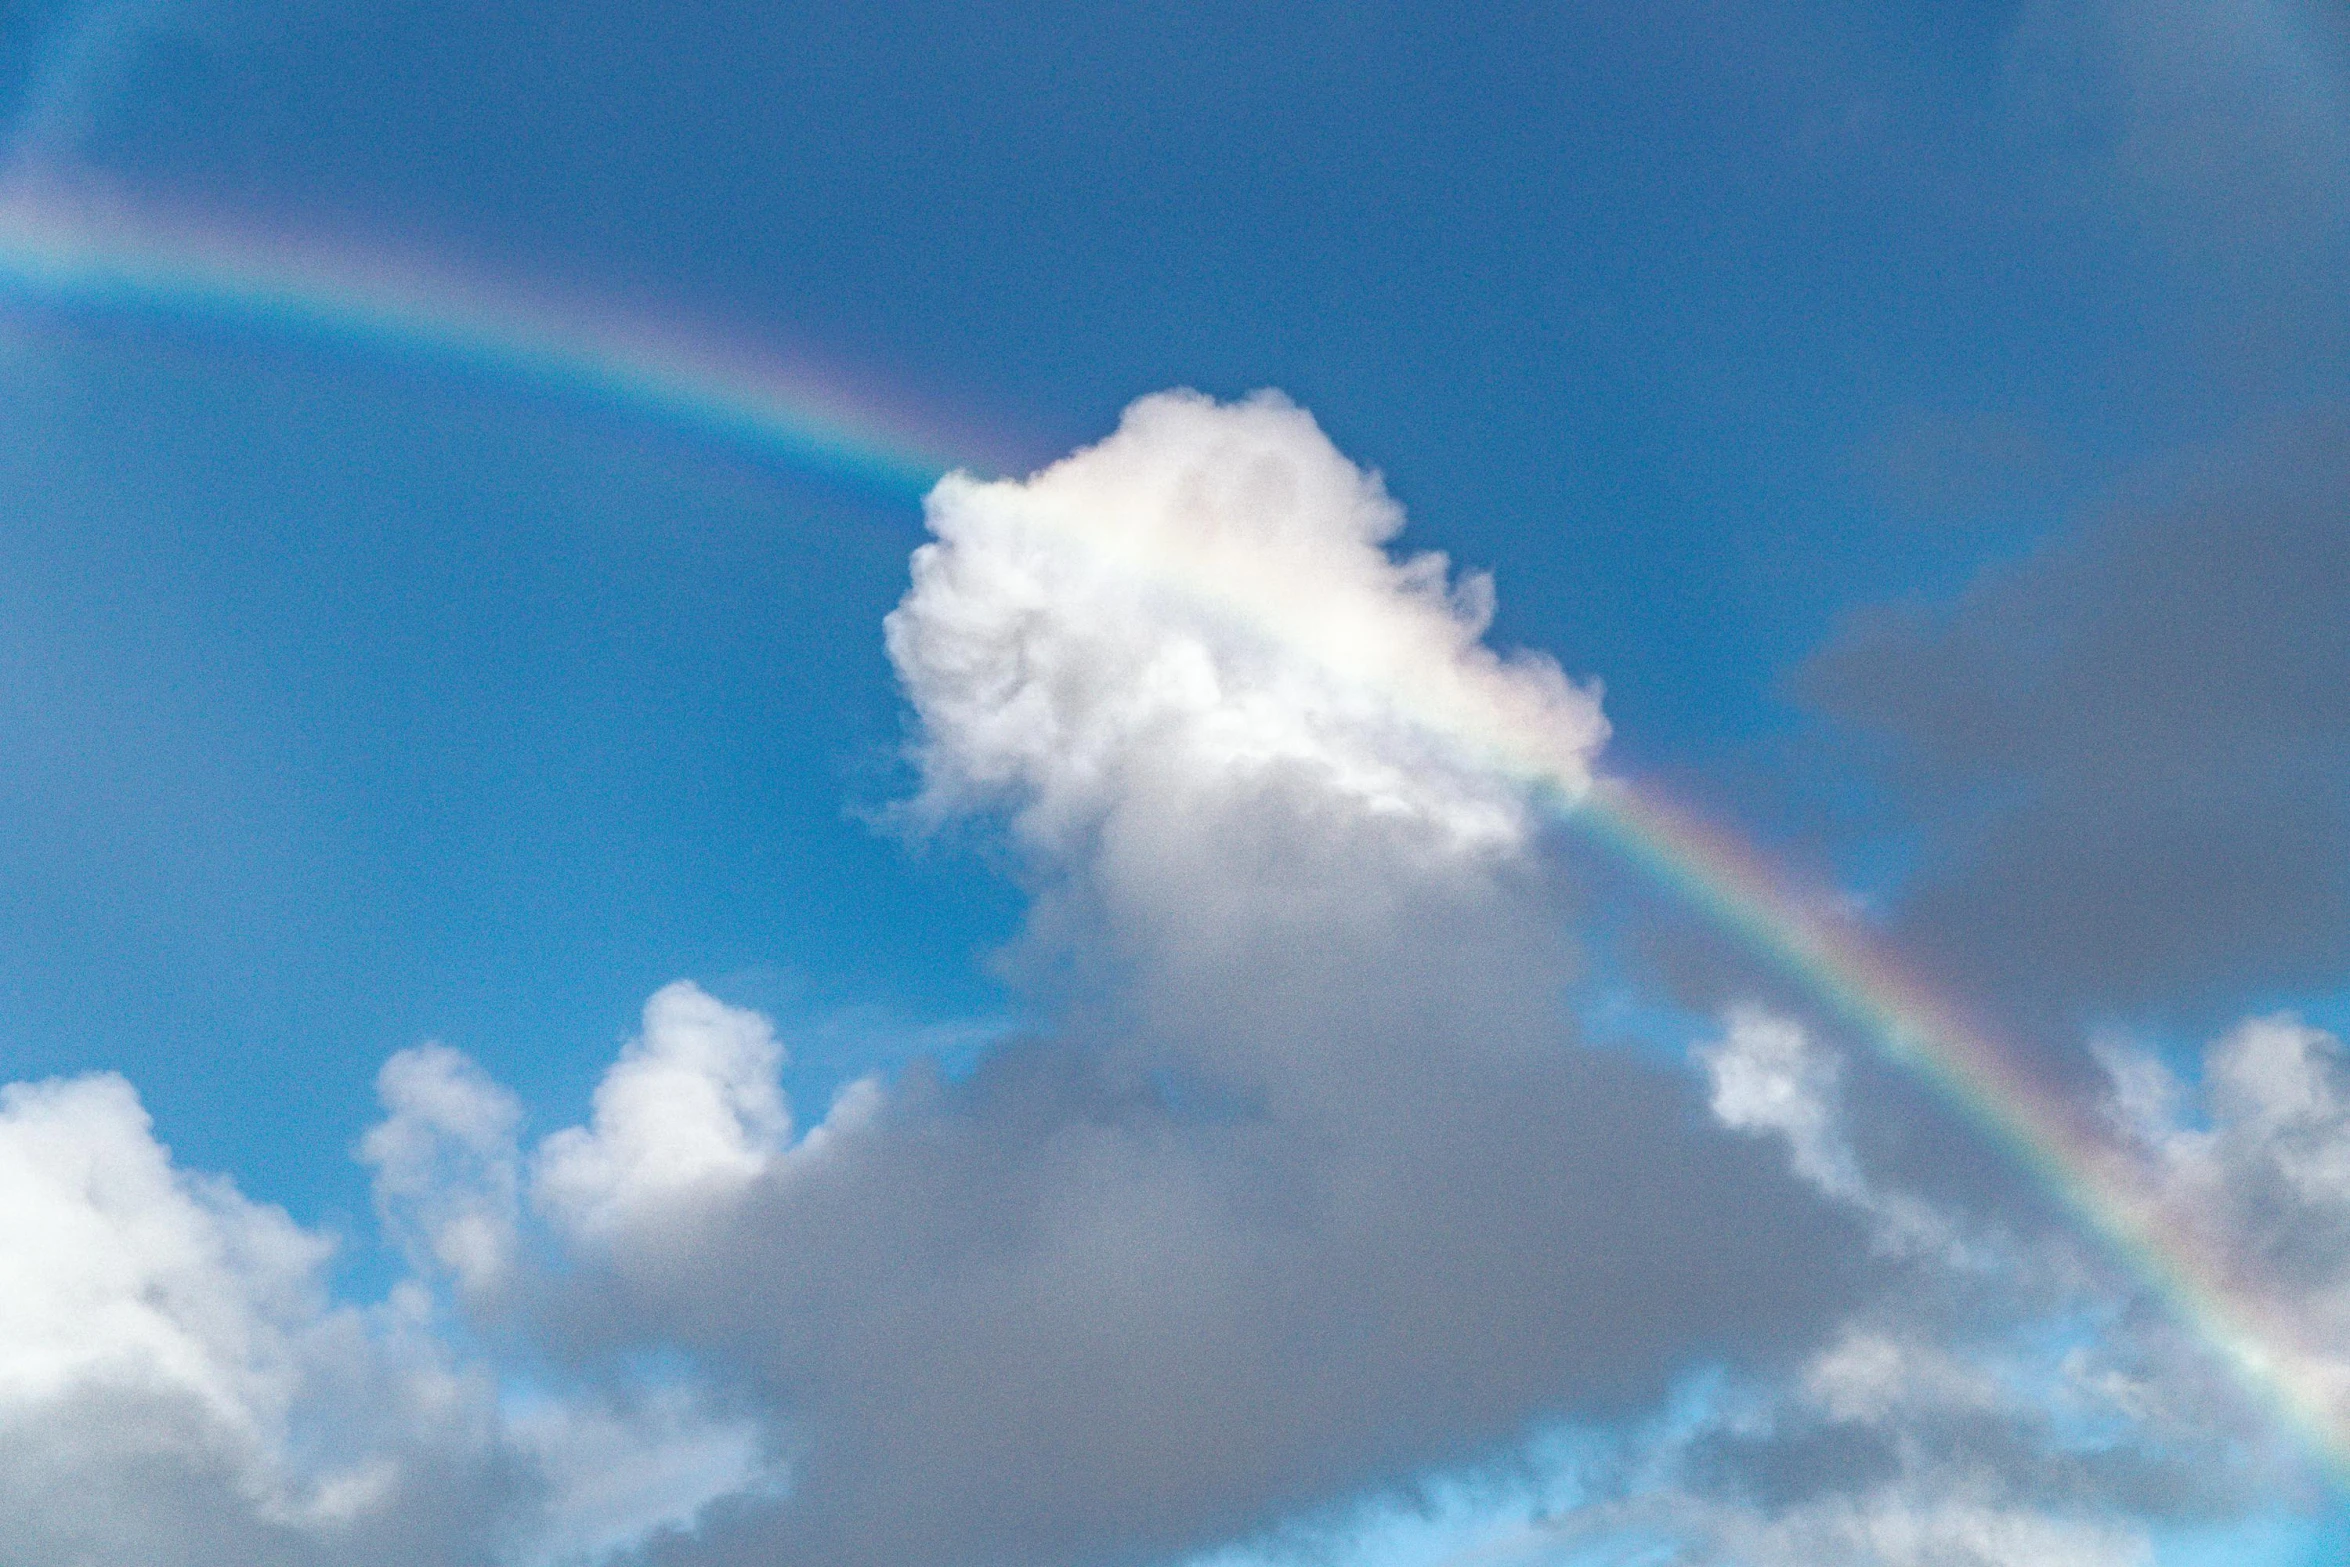 the rainbow is visible over the white clouds